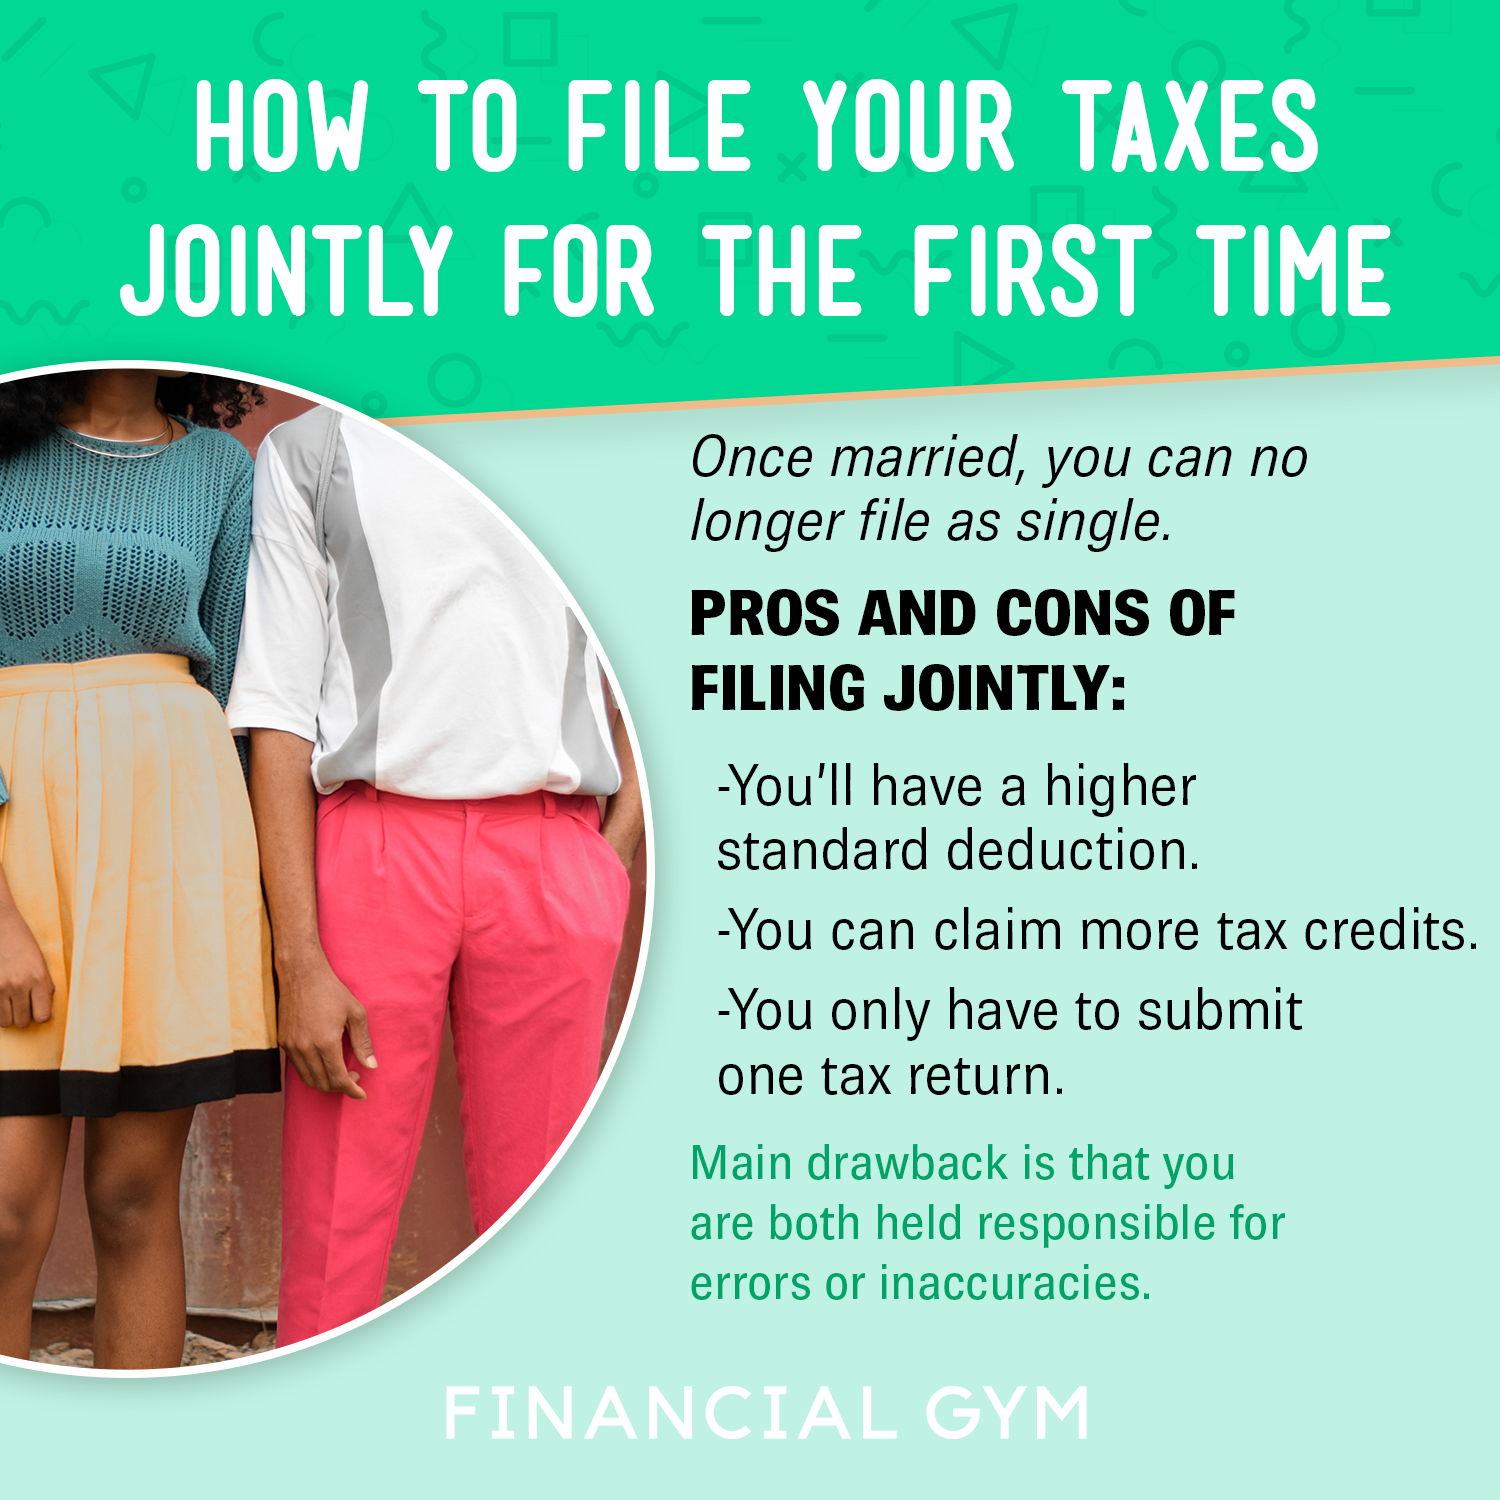 how-to-file-your-taxes-jointly-for-the-first-time